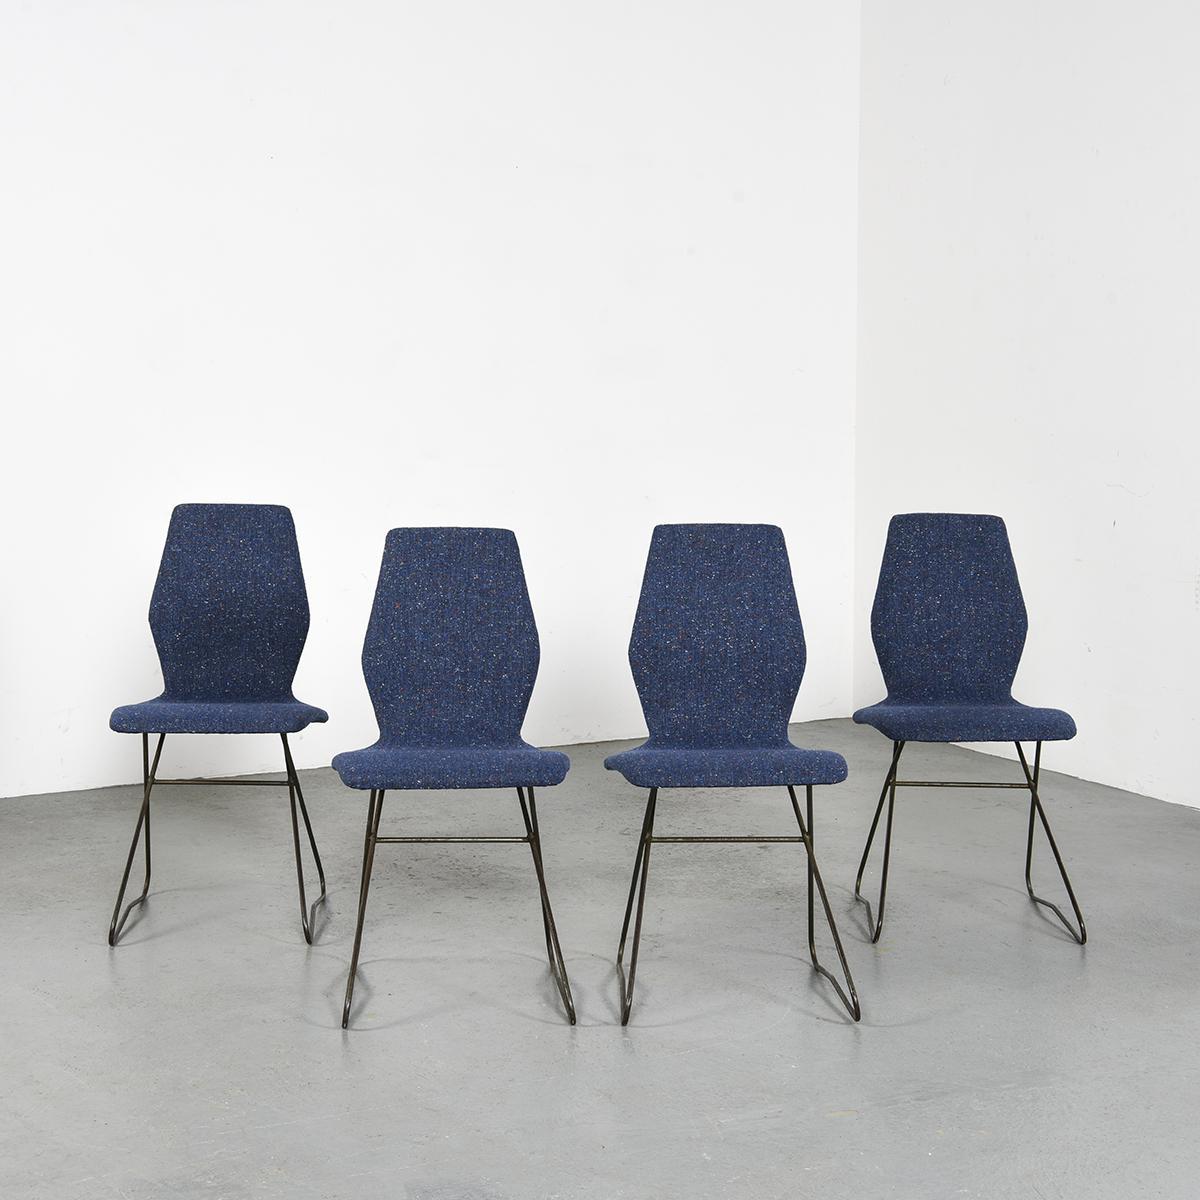 Set of four chairs by Louis Paolozzi : molded-pressed plywood shell padded and covered with a 50s spirit fabric, a red and white heather blue wool cloth resting on a black lacquered metal wire frame.

Manufacturer: Zol, circa 1956.